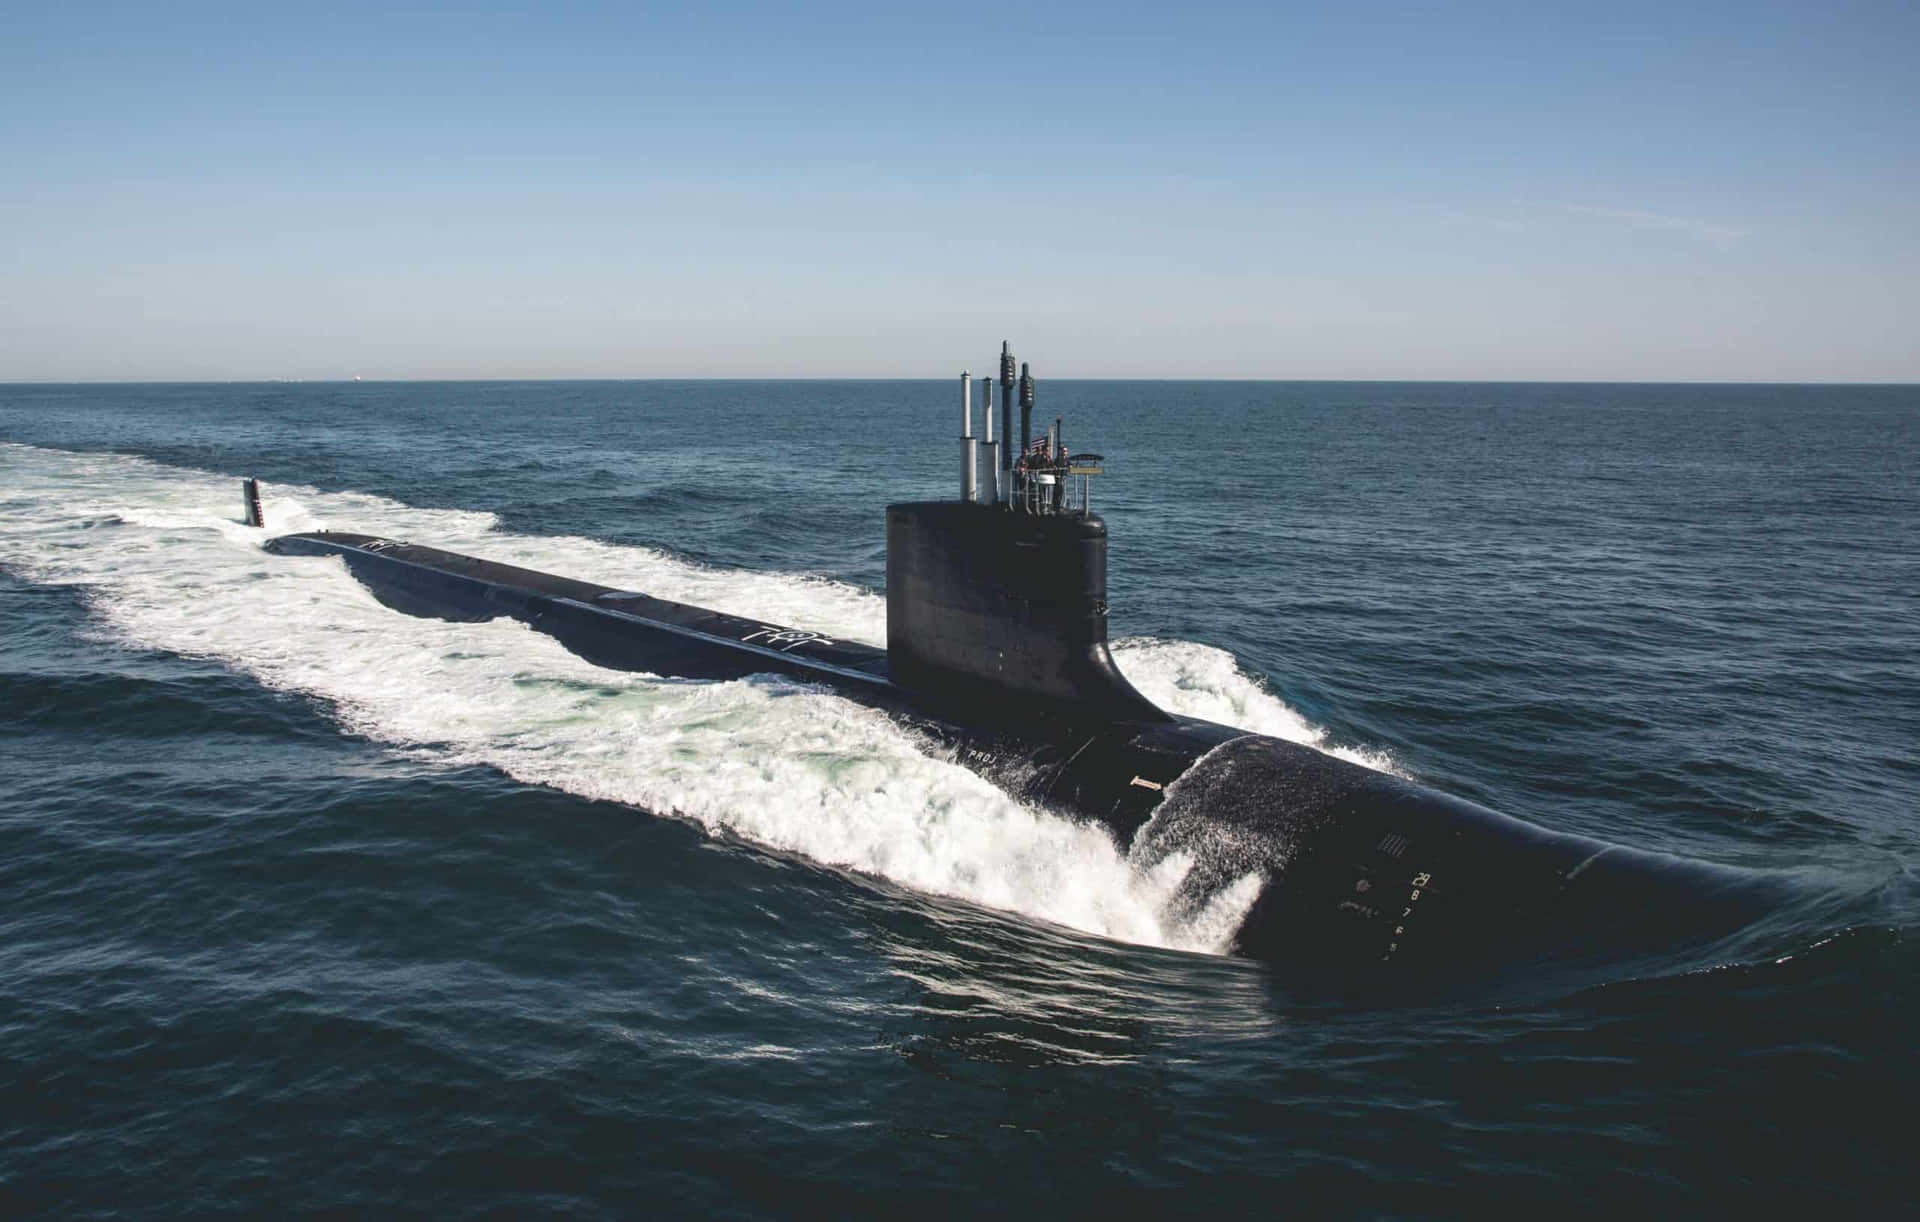 A Black Submarine Is Traveling In The Ocean